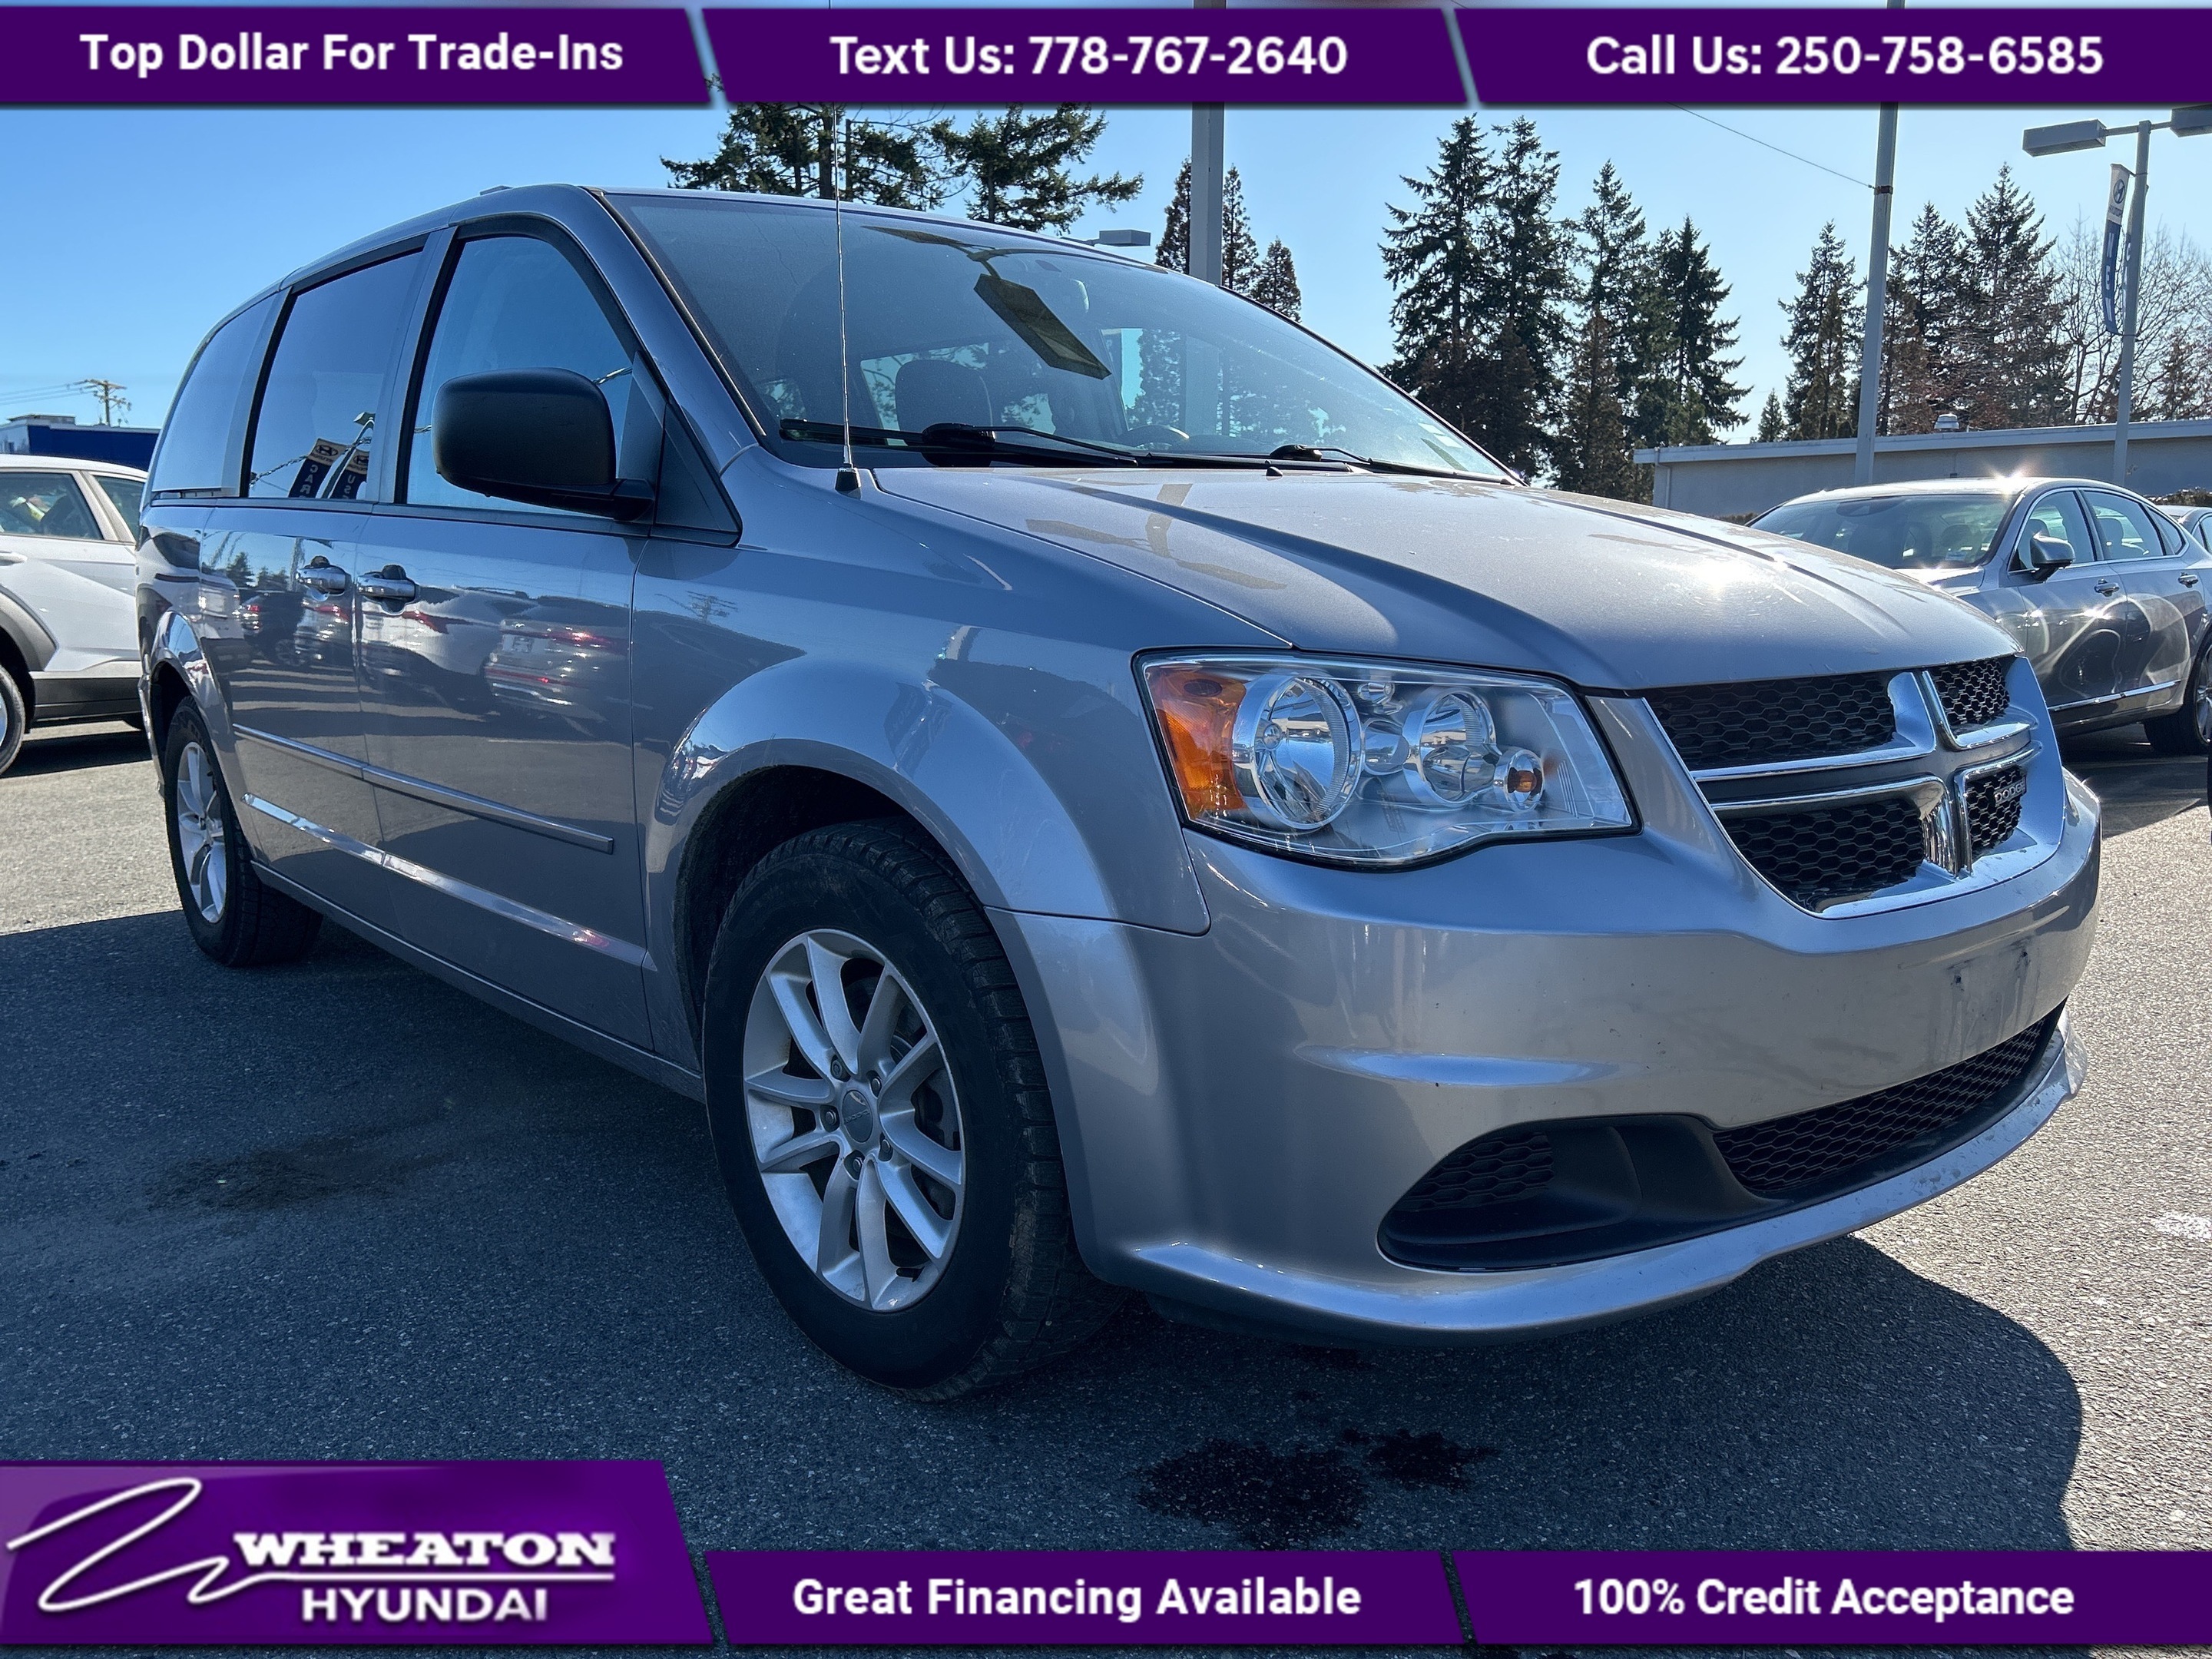 2015 Dodge Grand Caravan SXT, Local, Trade in, DVD, Touch Screen, Back Up C